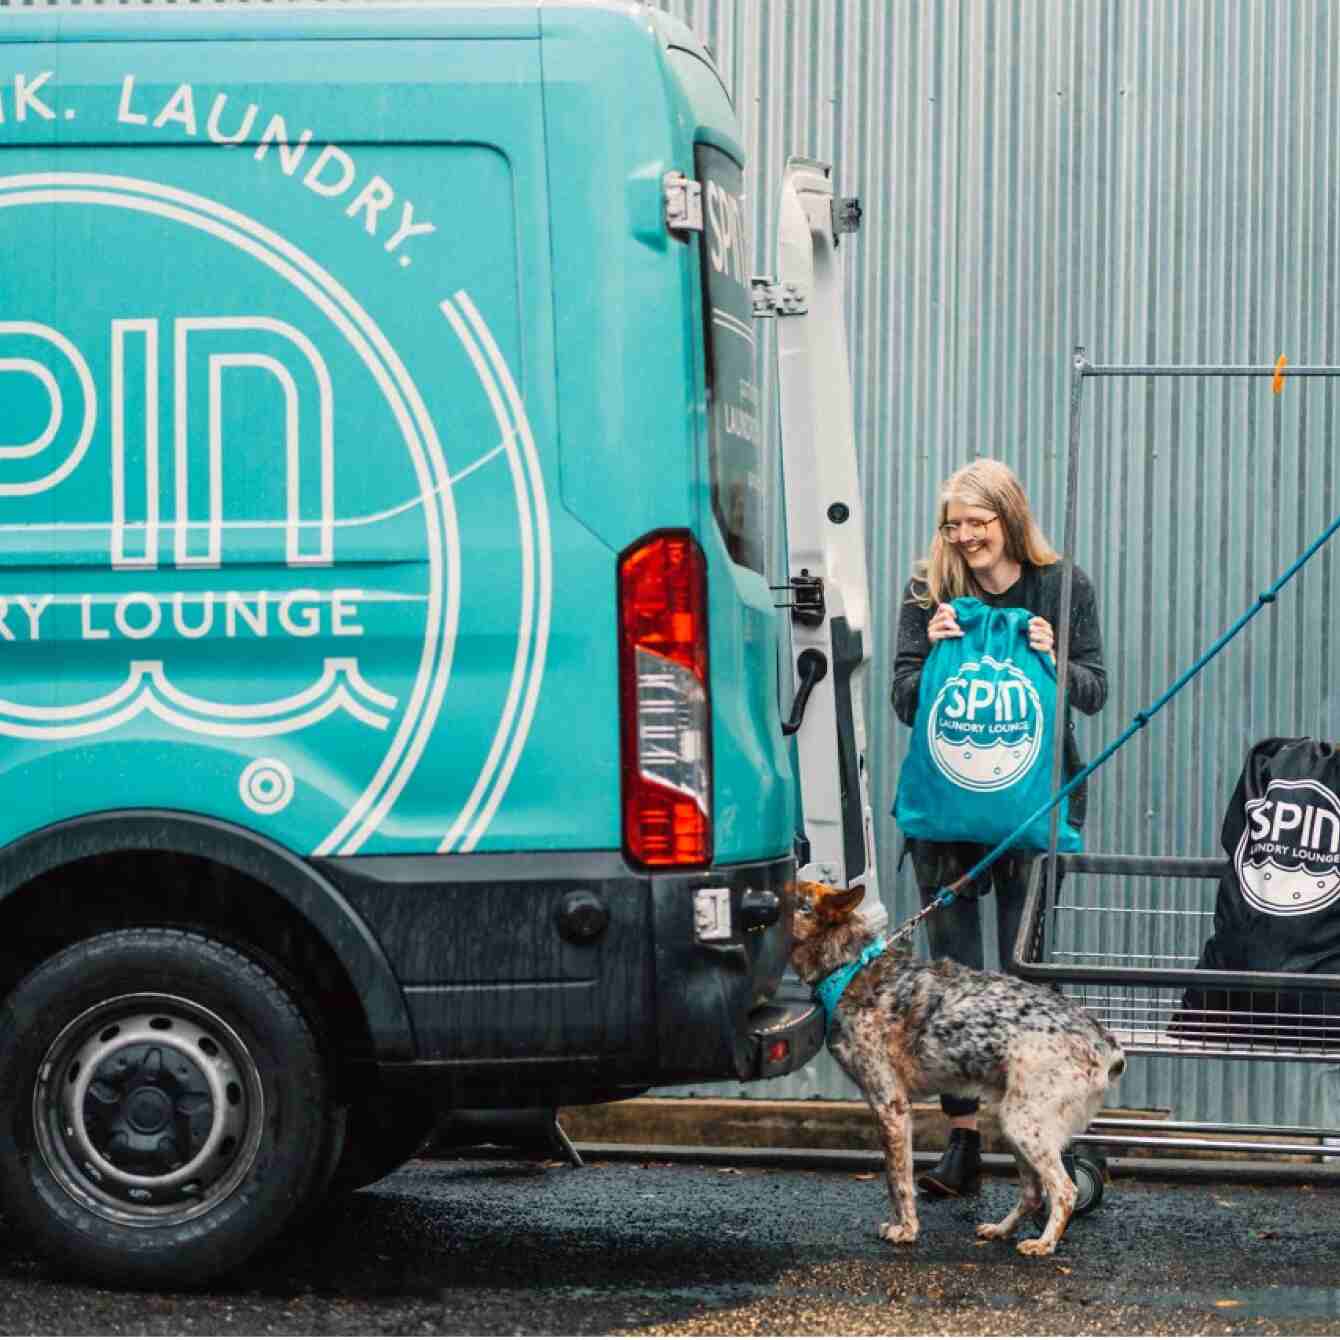 Health services business owner smiling with dog behind business van